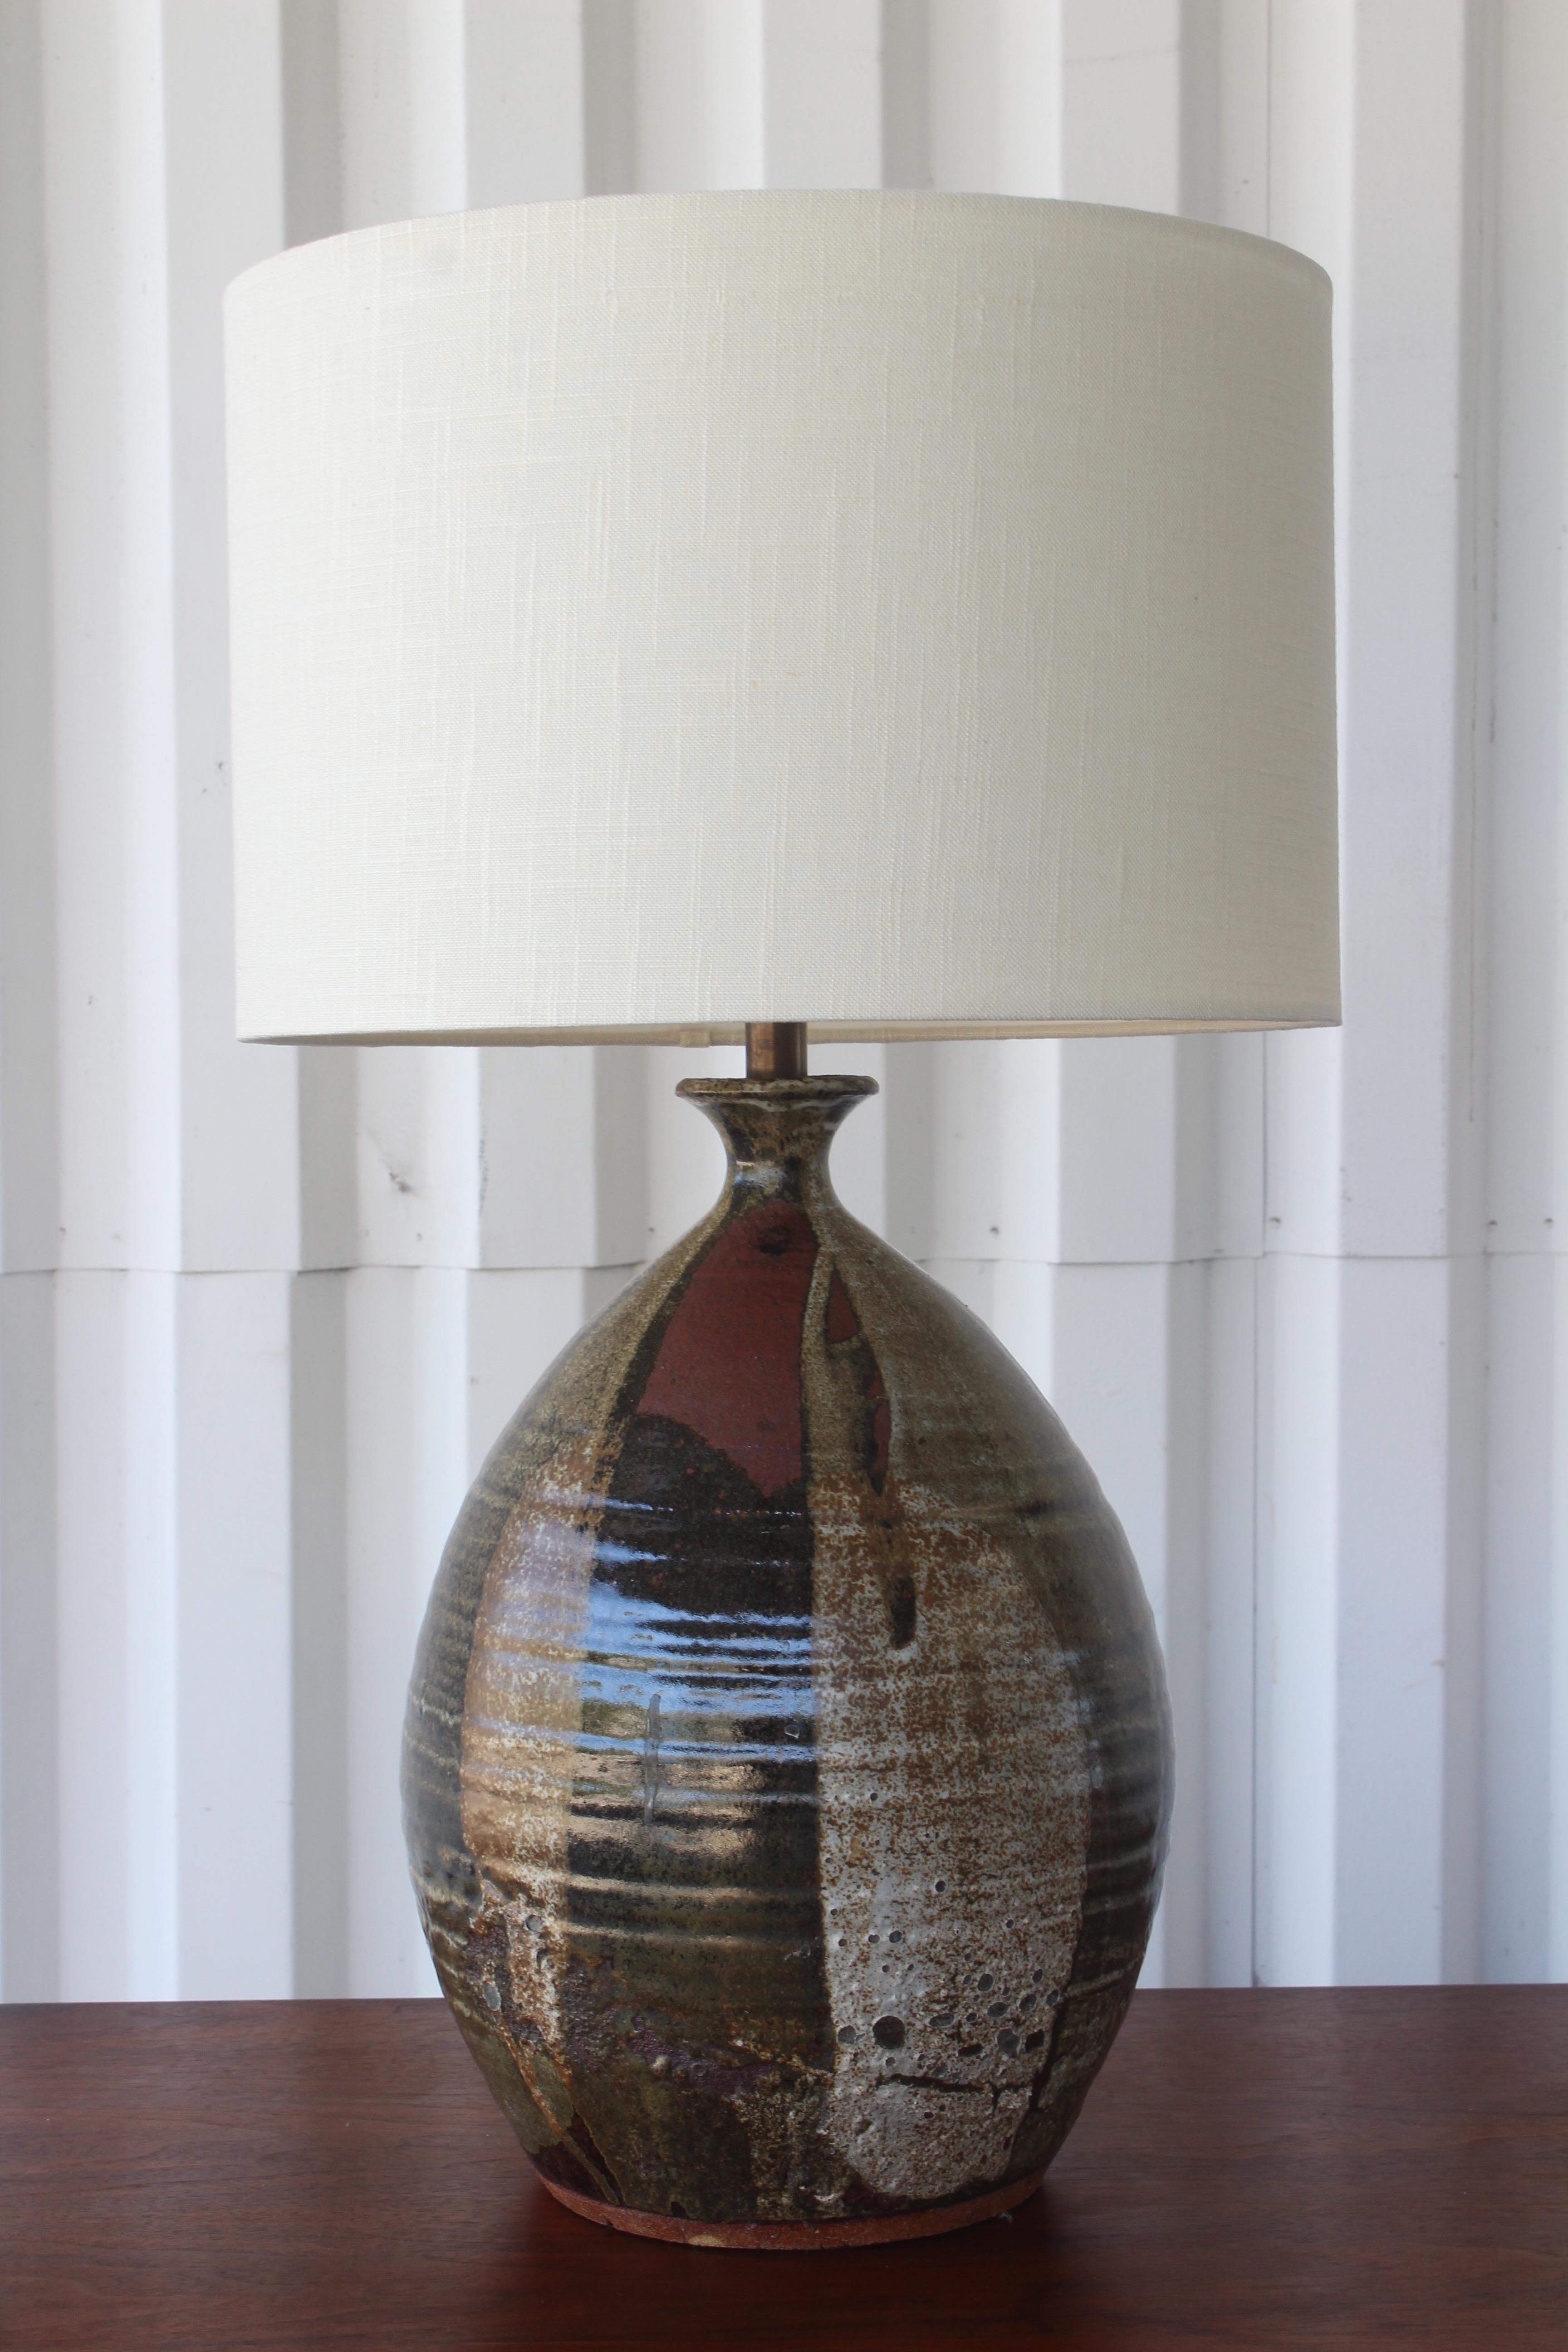 Vintage 1960s stoneware studio ceramic table lamp with drip glaze. Newly rewired with custom made shade in Belgian linen.
Measures: 26 inches high with shade, 16 inch high base. Lamp base is about 12 inches in diameter. Lamp shade is 15 x 15 x 10.